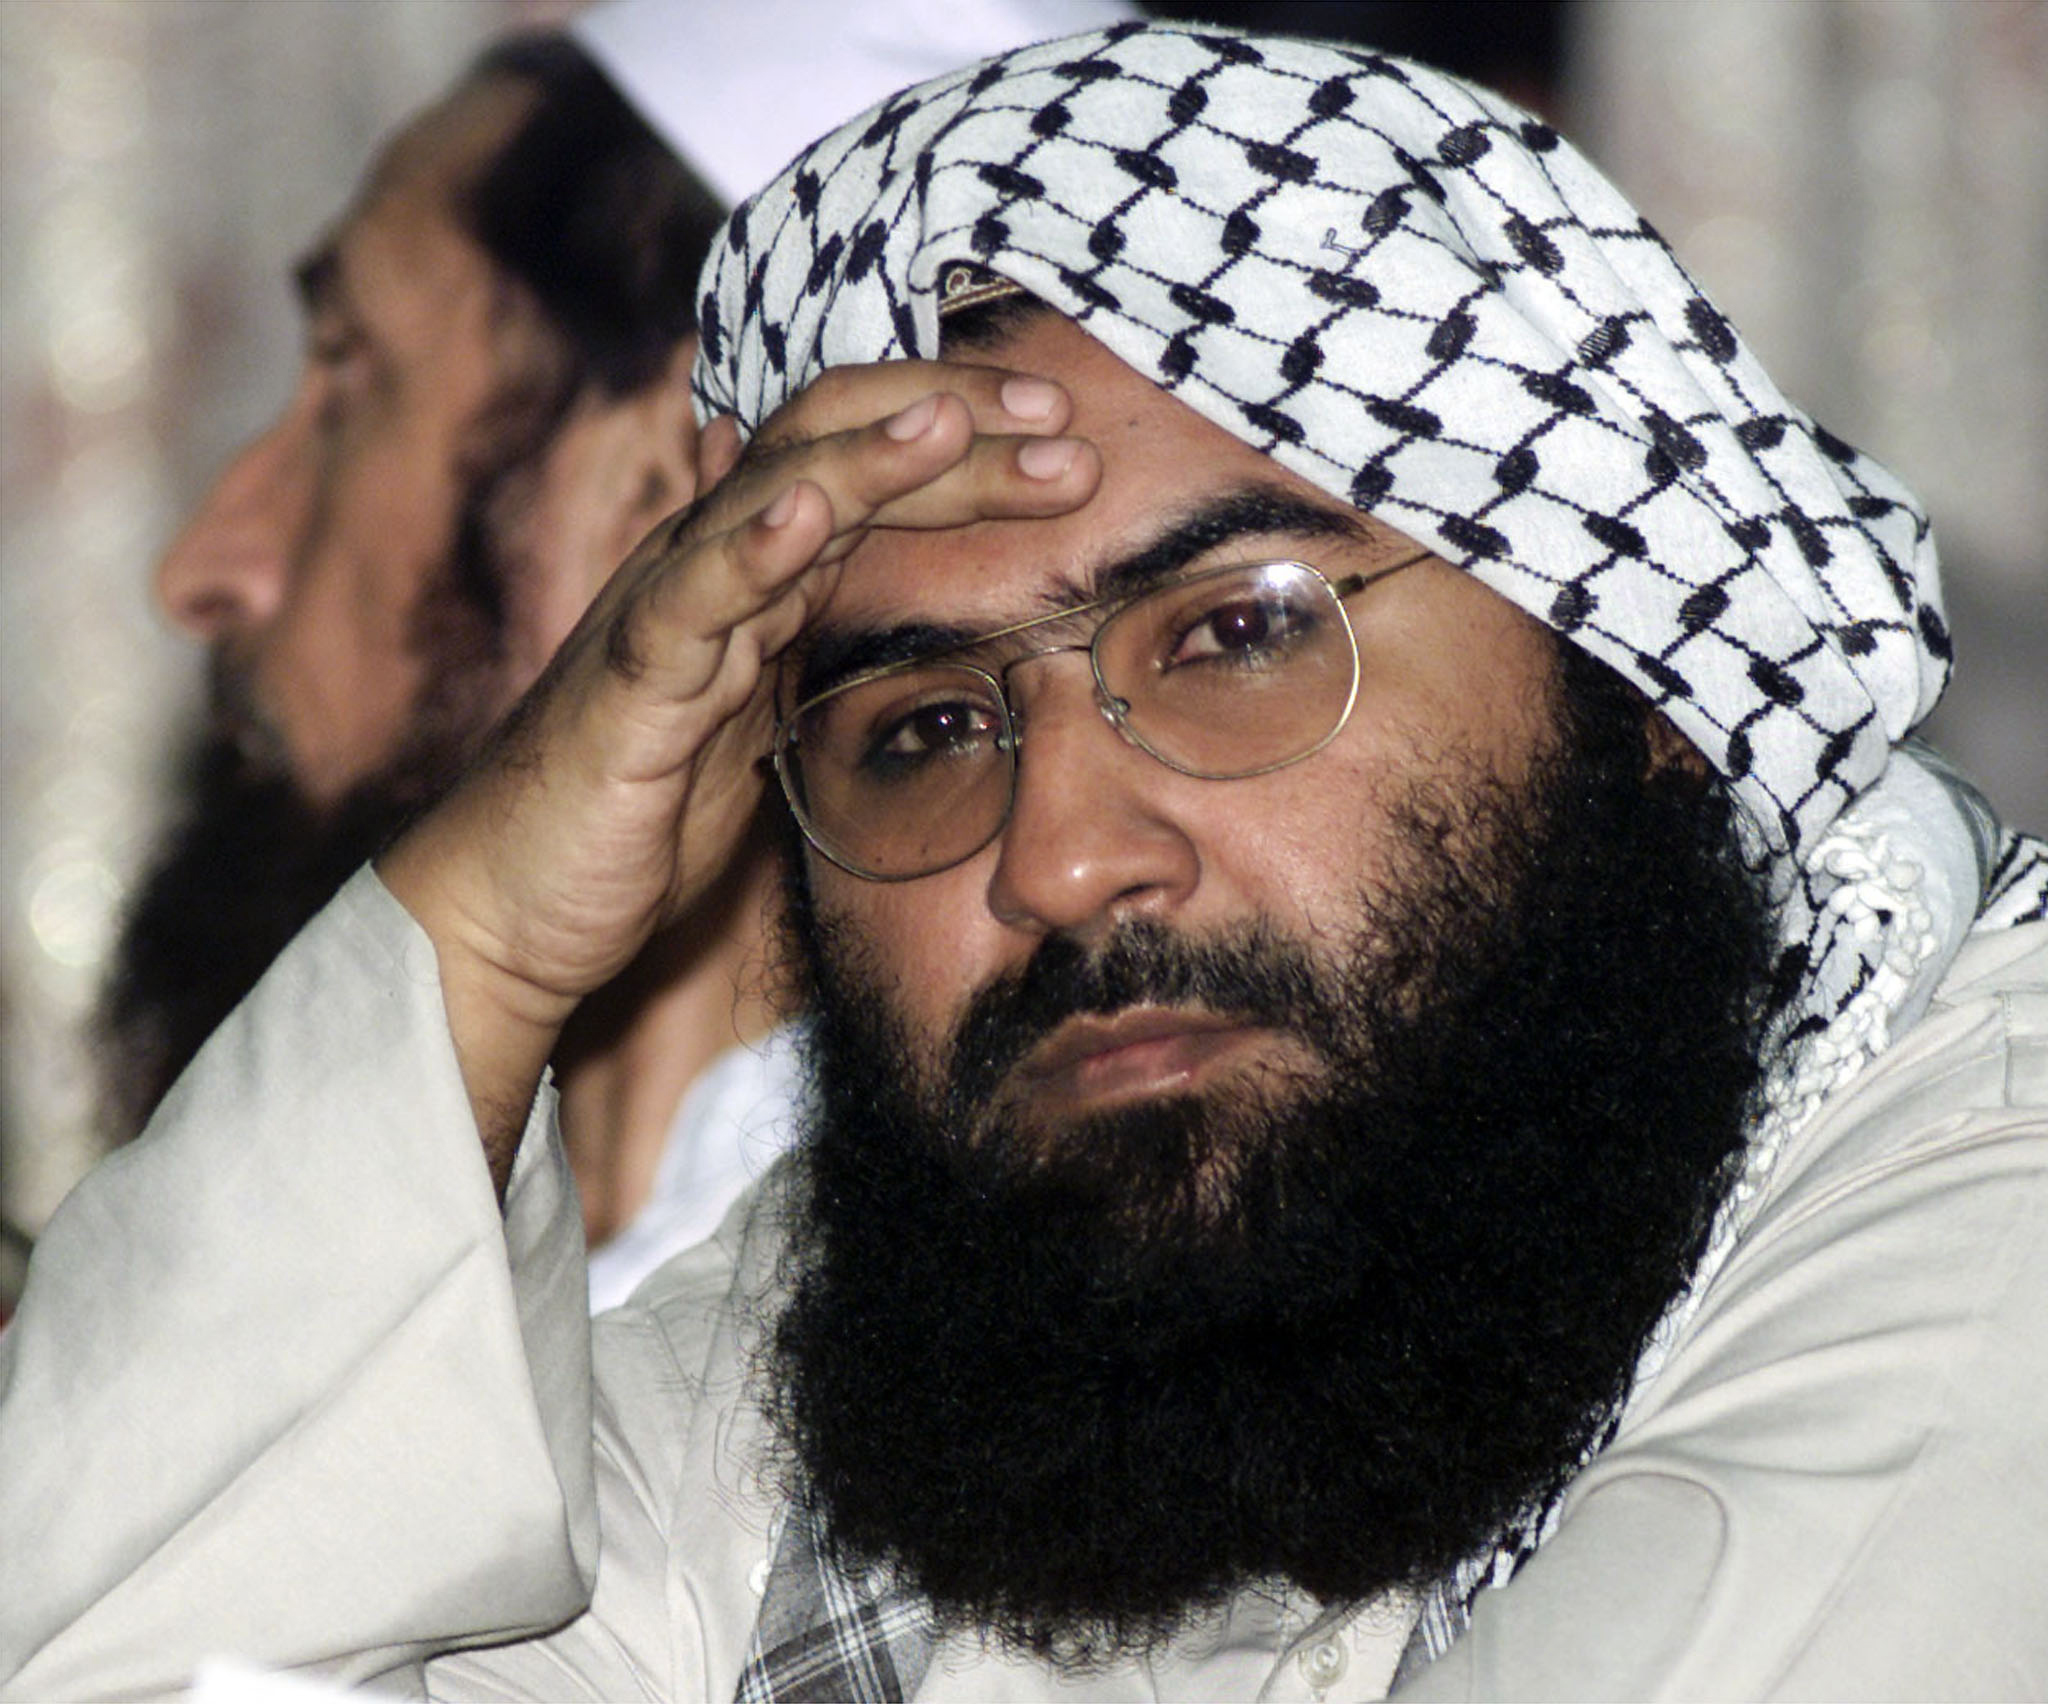 JeM chief Masood Azhar's brother and son have been taken into preventive detention [File: Reuters] 